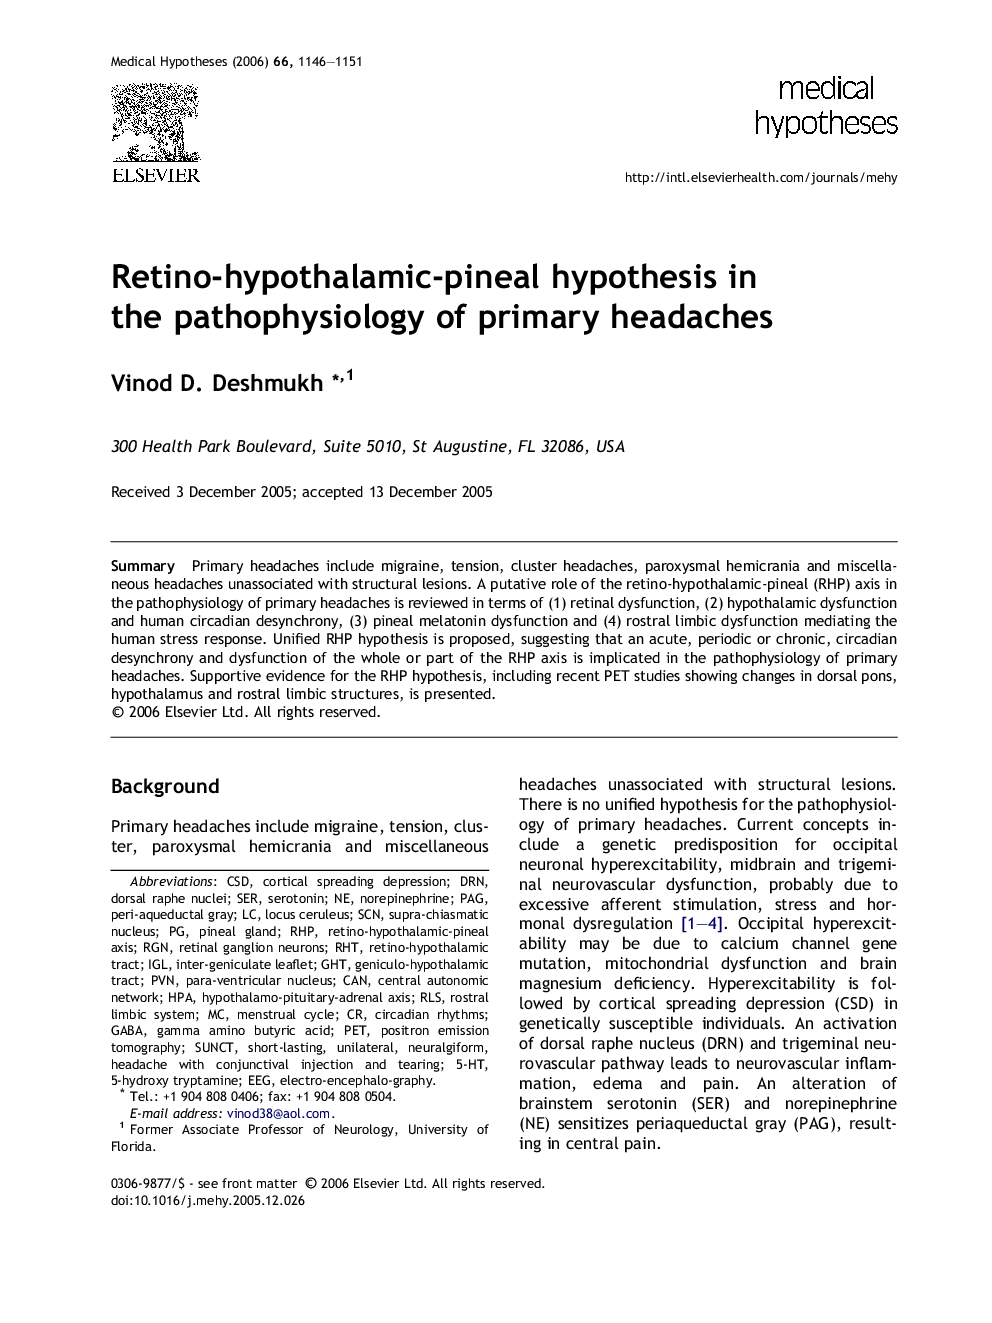 Retino-hypothalamic-pineal hypothesis in the pathophysiology of primary headaches